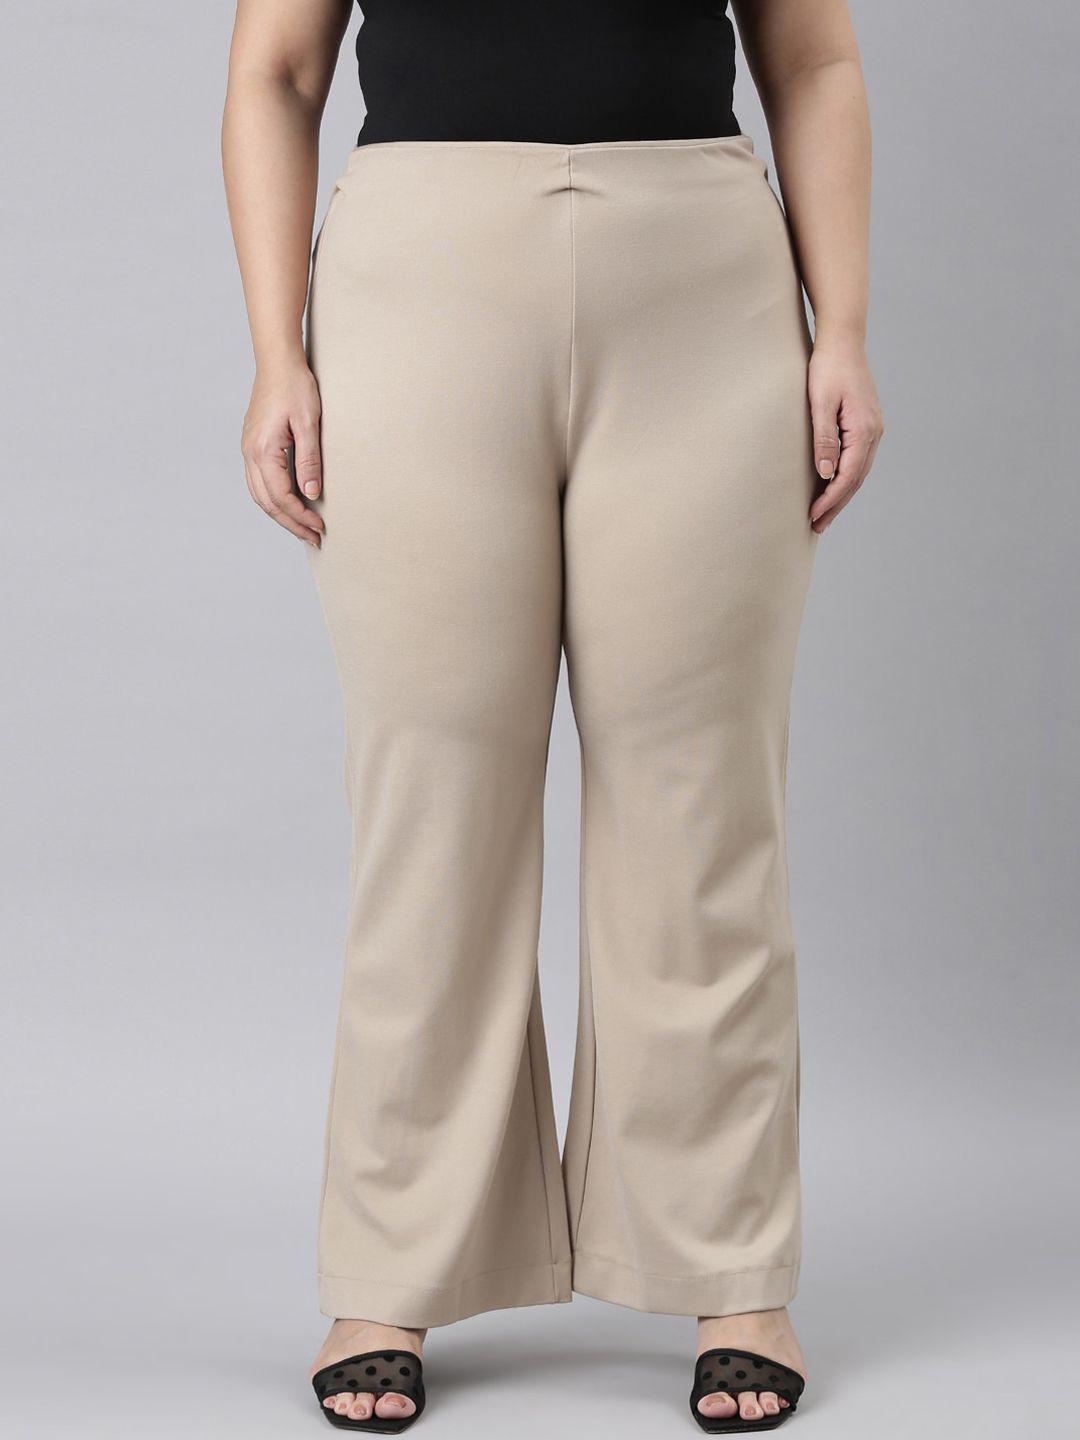 go-colors-plus-size-women-relaxed-flared-high-rise-parallel-trousers